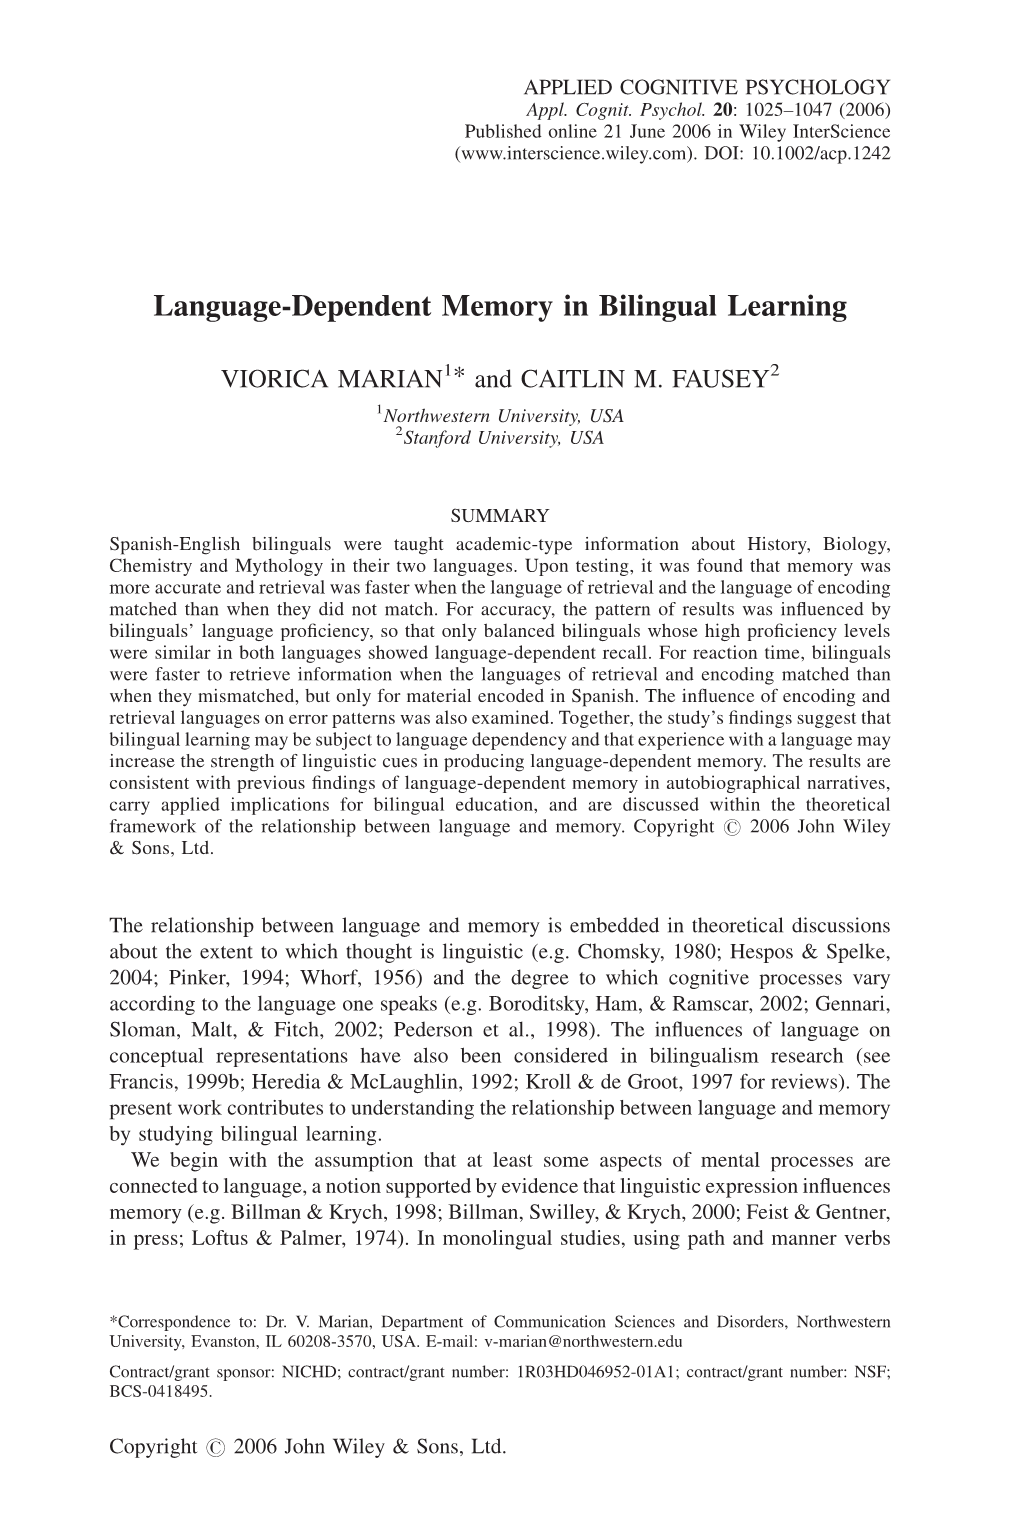 Language-Dependent Memory in Bilingual Learning